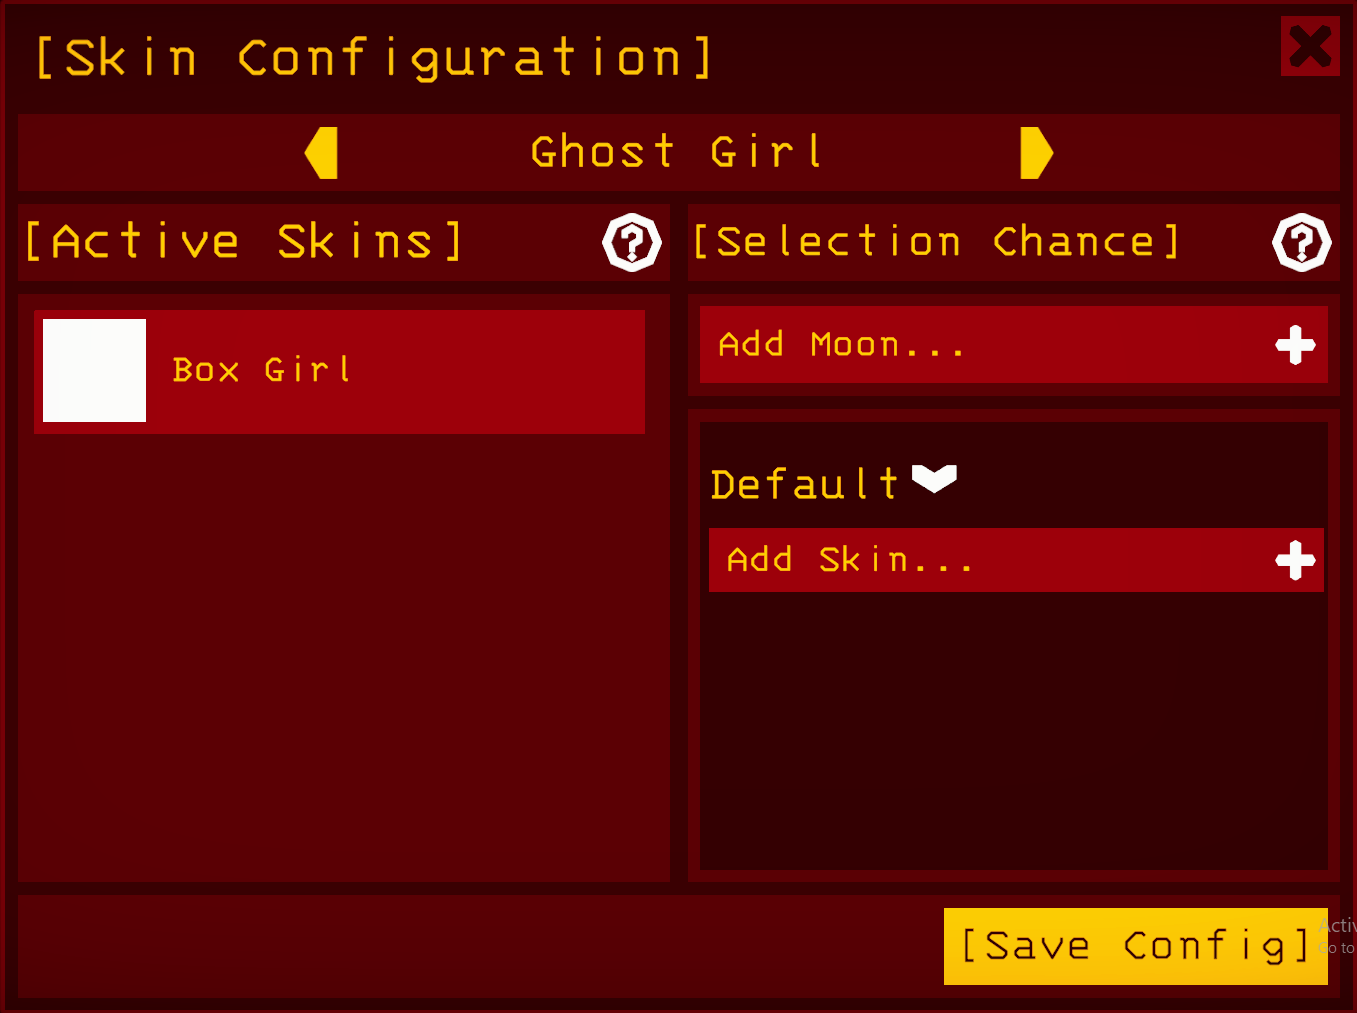 The skin configuration menu showing an alternate enemy configuration